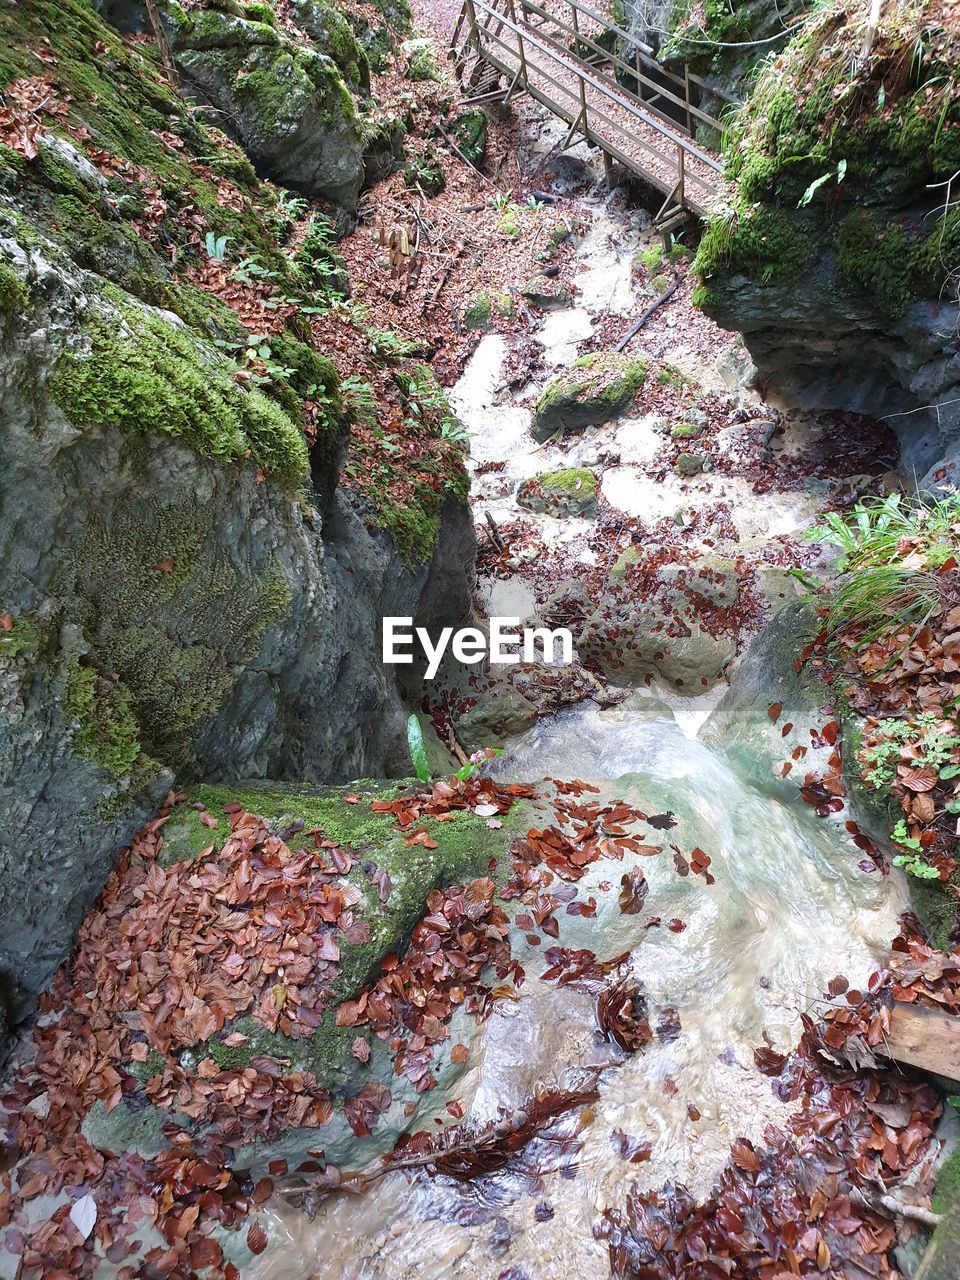 HIGH ANGLE VIEW OF STREAM FLOWING THROUGH ROCKS